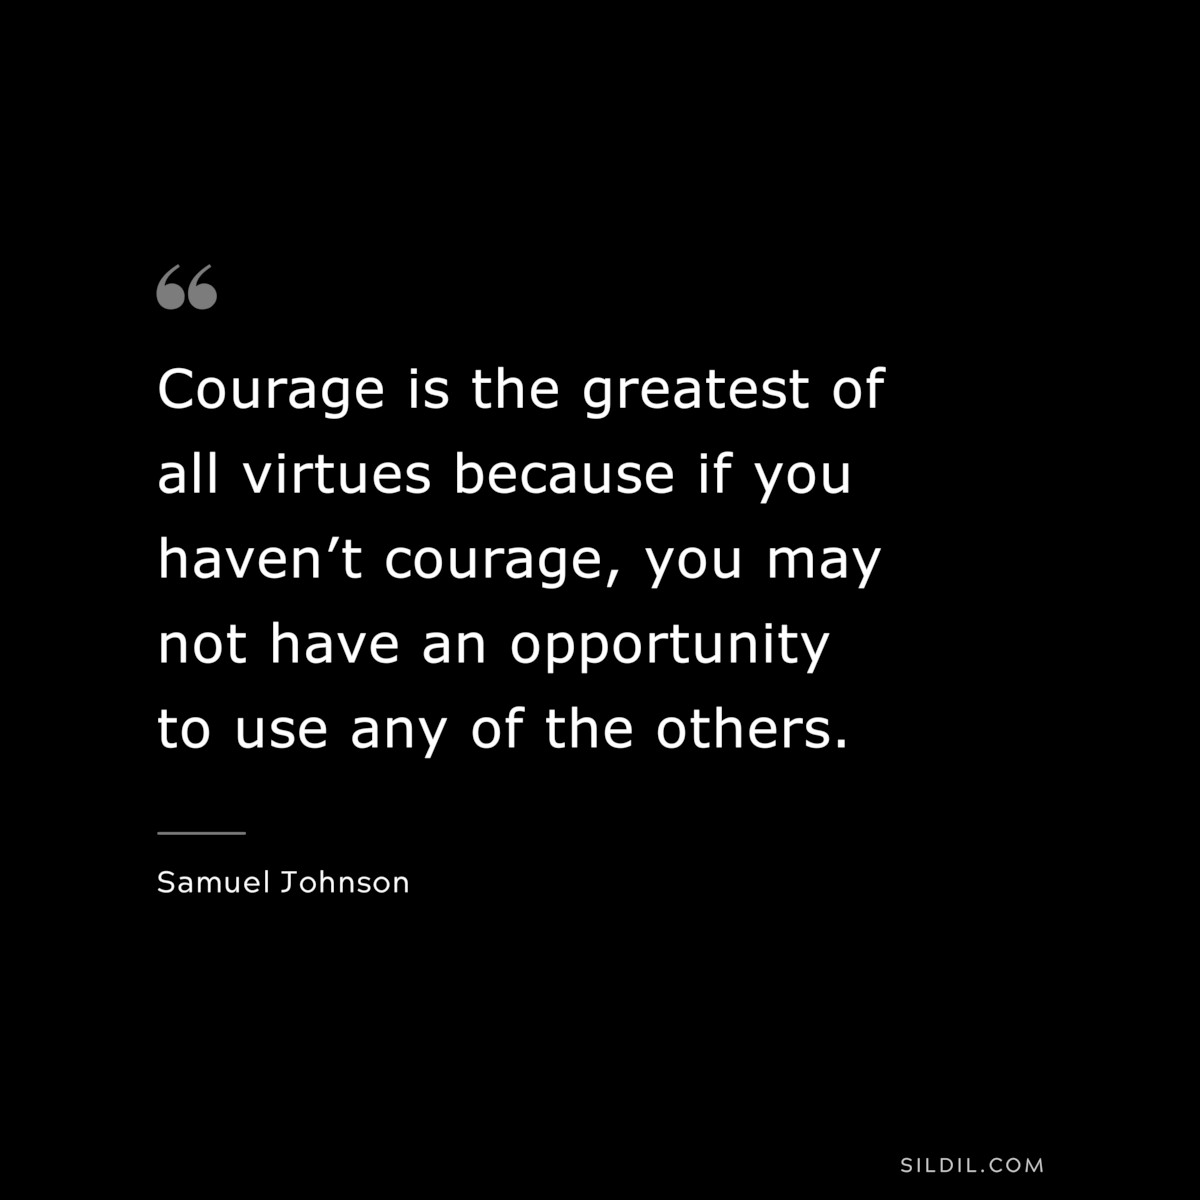 Courage is the greatest of all virtues because if you haven’t courage, you may not have an opportunity to use any of the others. ― Samuel Johnson